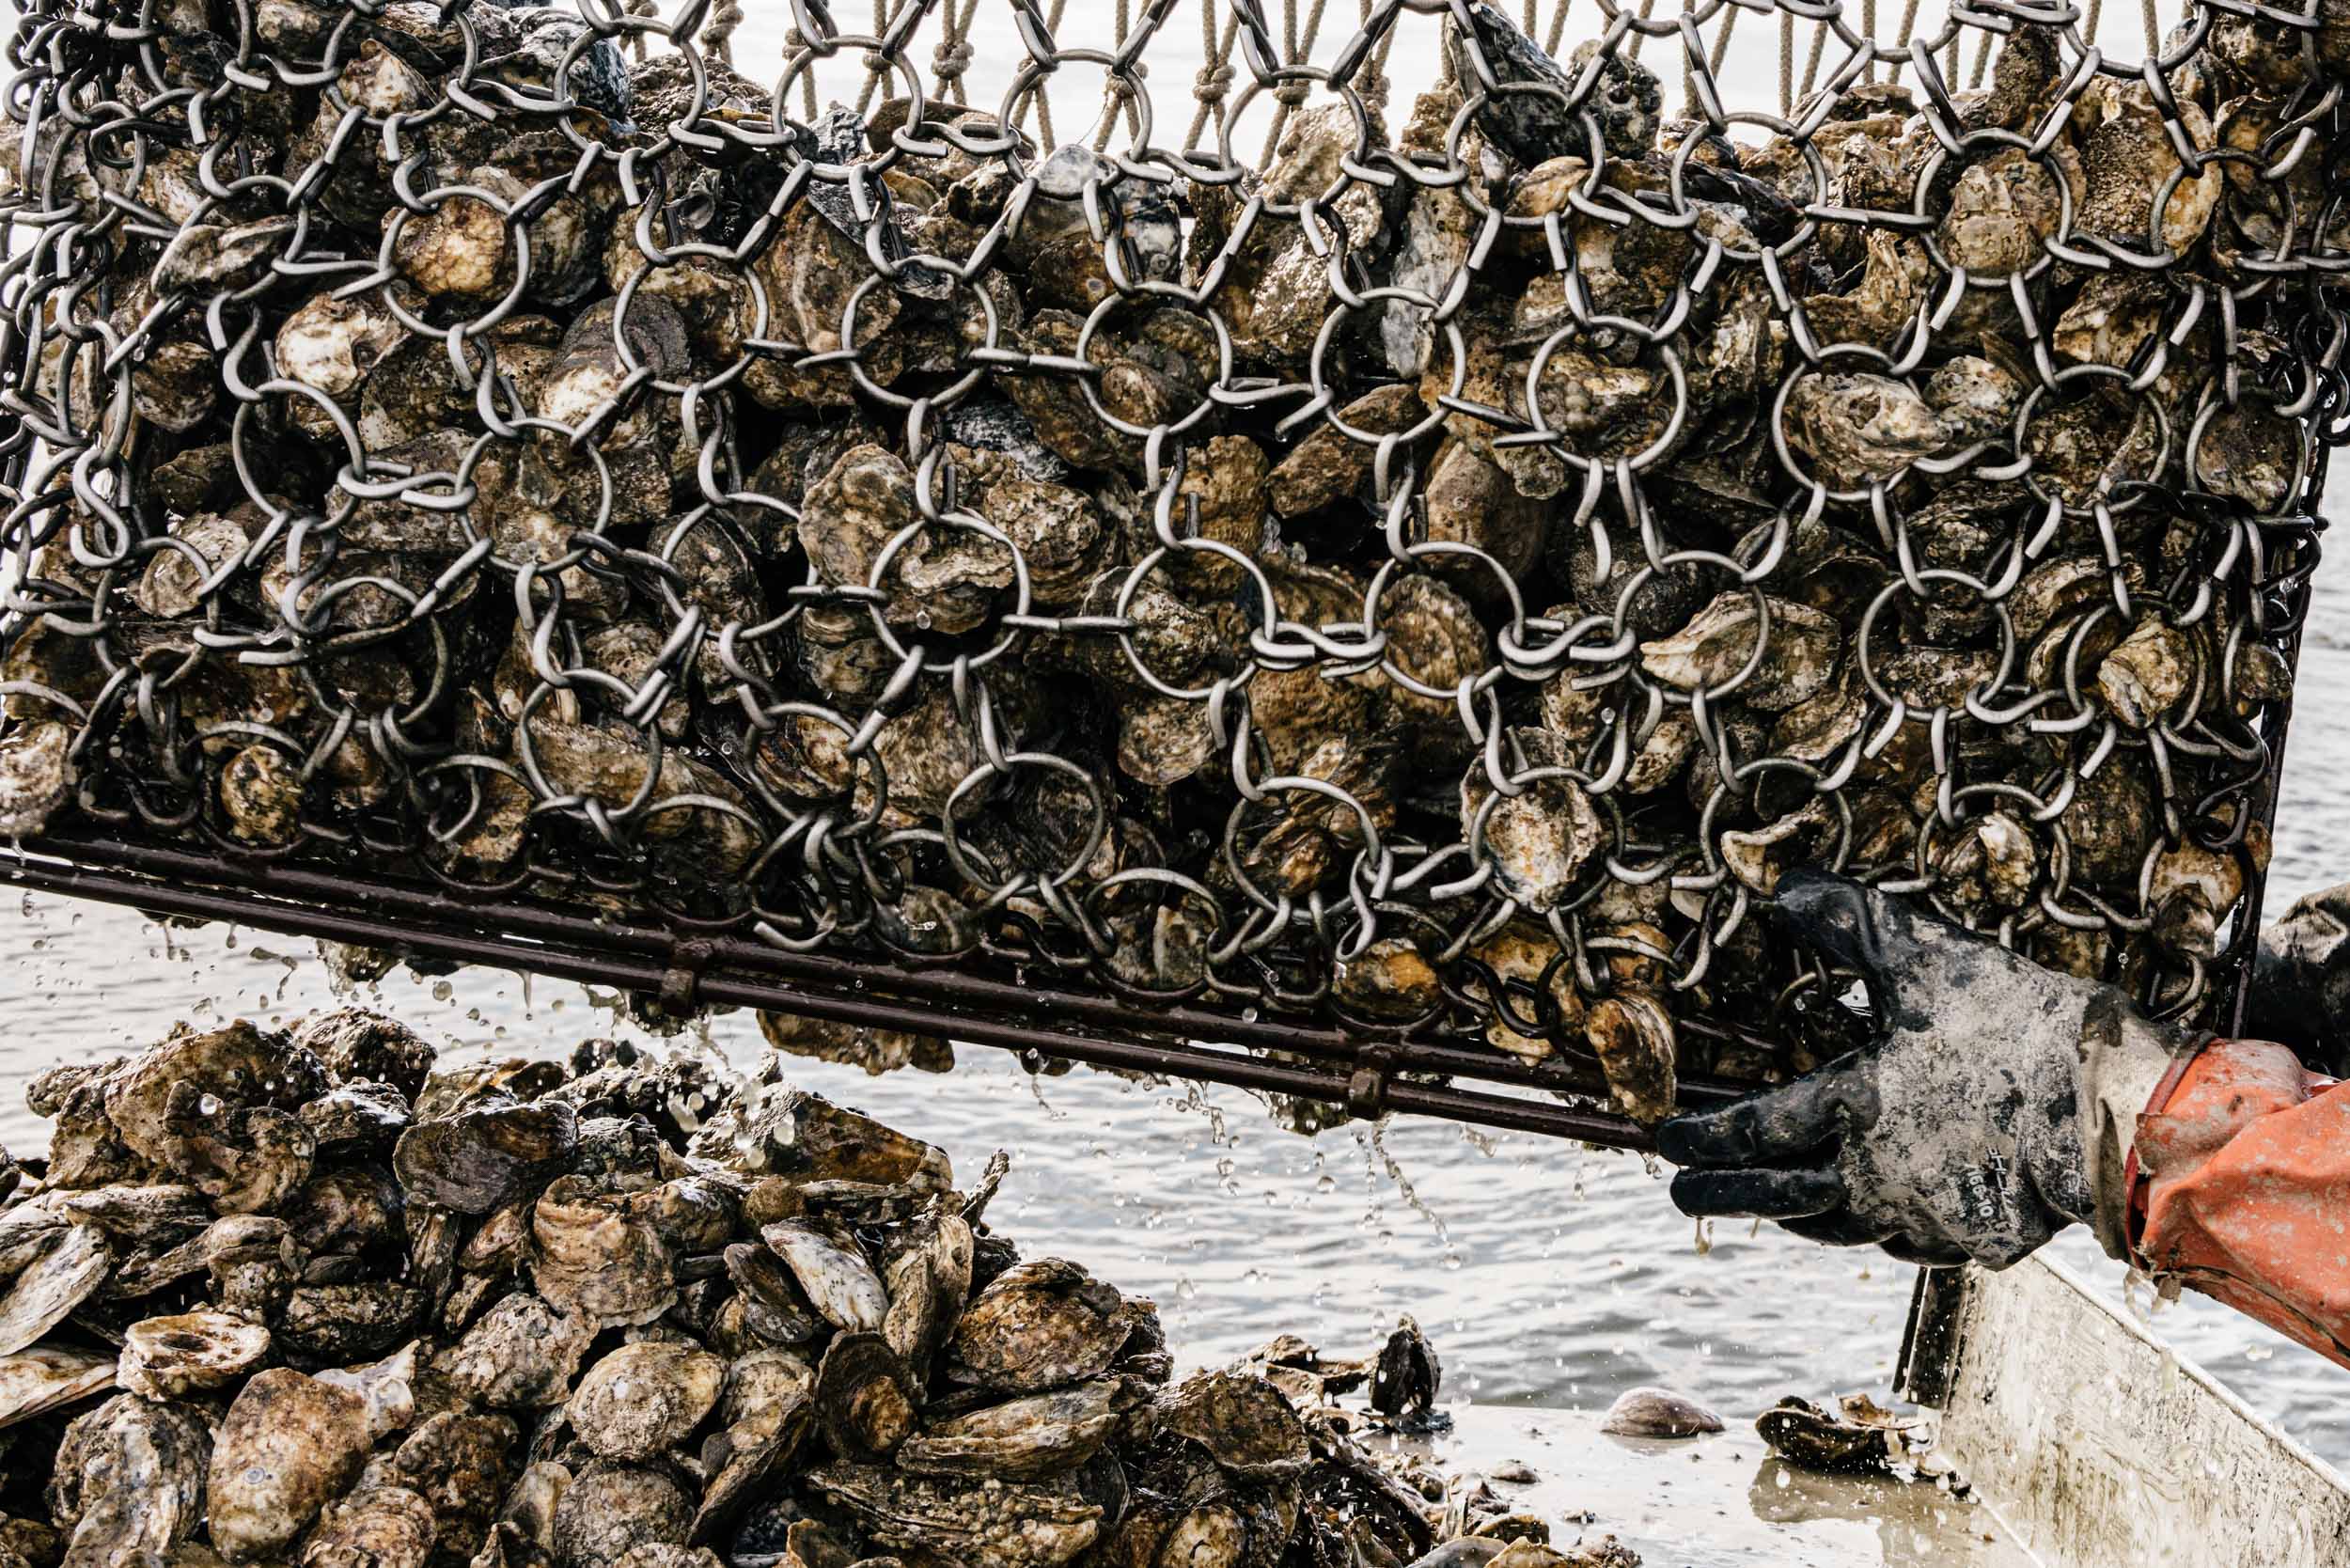 Washington DC editorial photographer oysters in dredge pulled up from bottom of bay